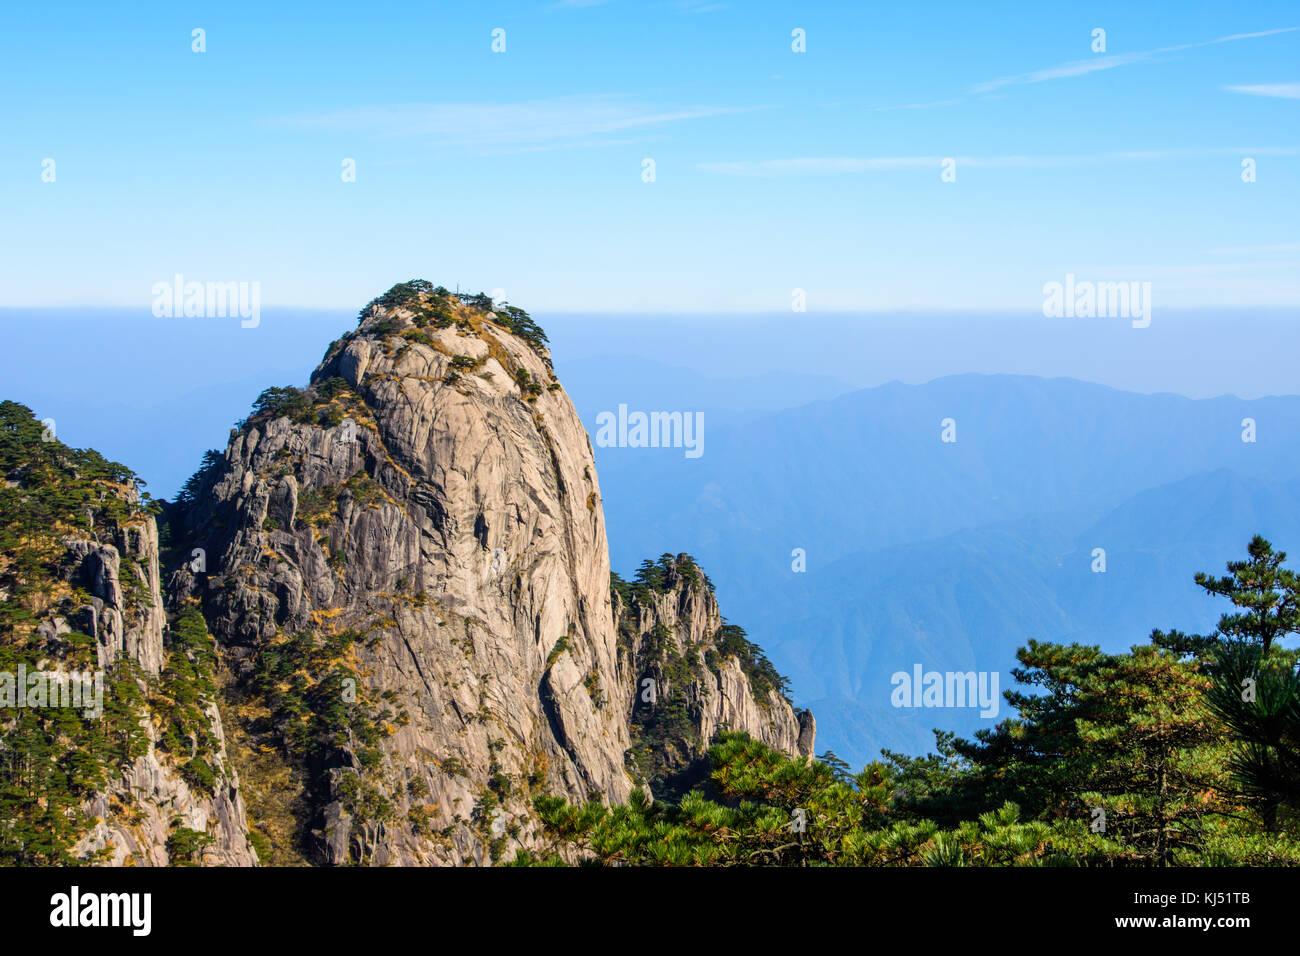 Big Granite boulder with rolling hills in the background on Yellow Mountain in China Stock Photo